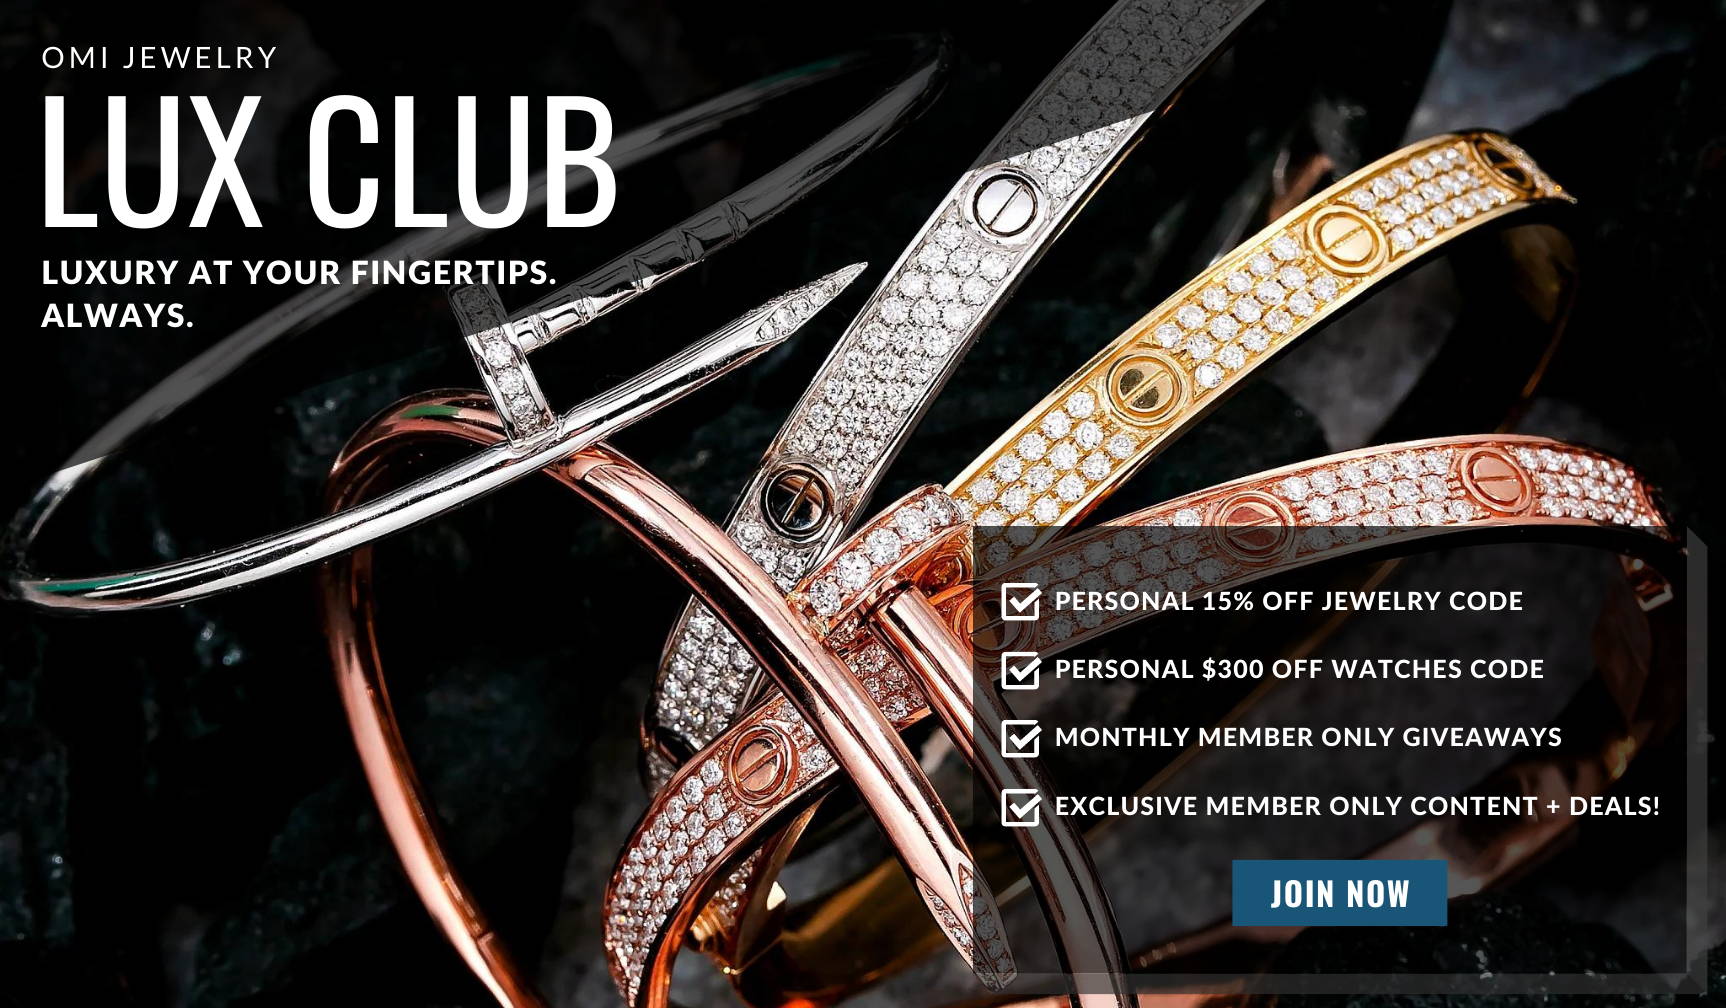 OMI JEWELRY LUX CLUB - LUXURY AT YOUR FINGERTIPS. ALWAYS. - PERSONAL 15% OFF JEWELRY CODE - PERSONAL $300 OFF WATCHES CODE - MONTHLY MEMBER ONLY GIVEAWAYS - EXCLUSIVE MEMBER ONLY CONTENT + DEALS! - JOIN NOW